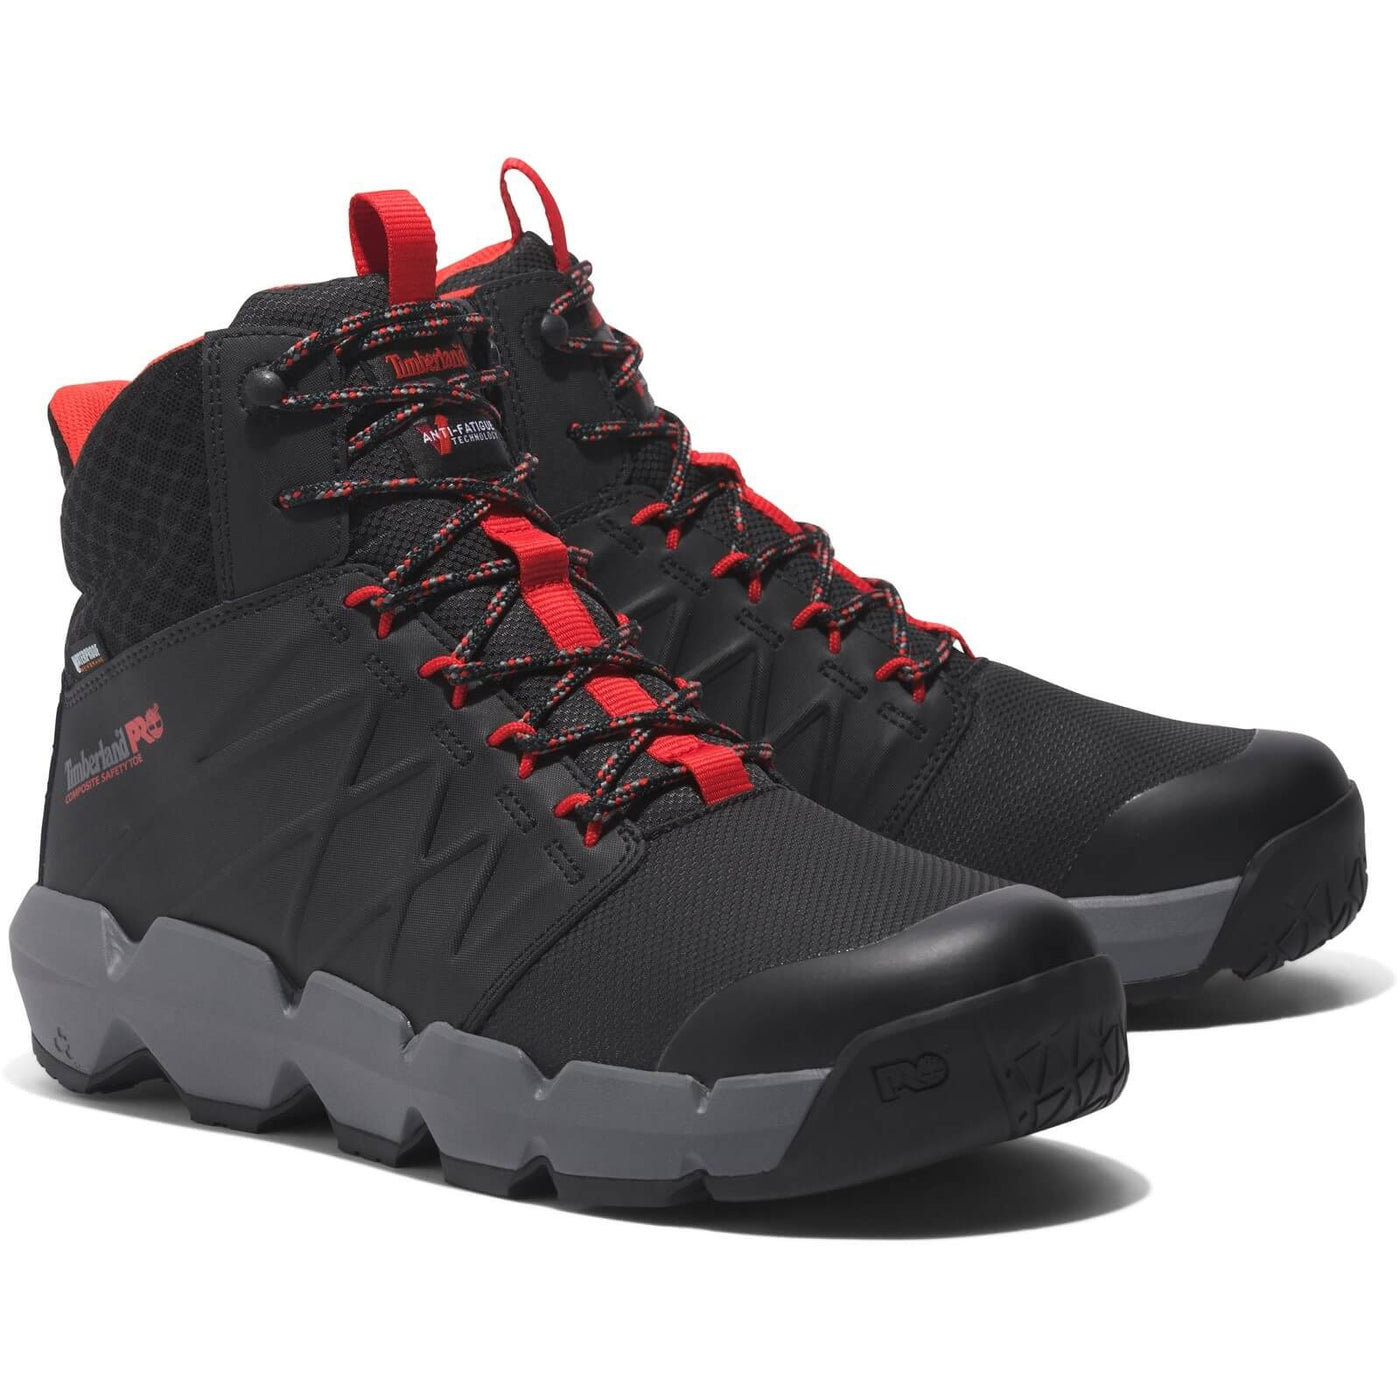 Timberland Pro Morphix 6 Inch Waterproof Composite S7L Hiker Safety Boots Black/Red 3#colour_black-red